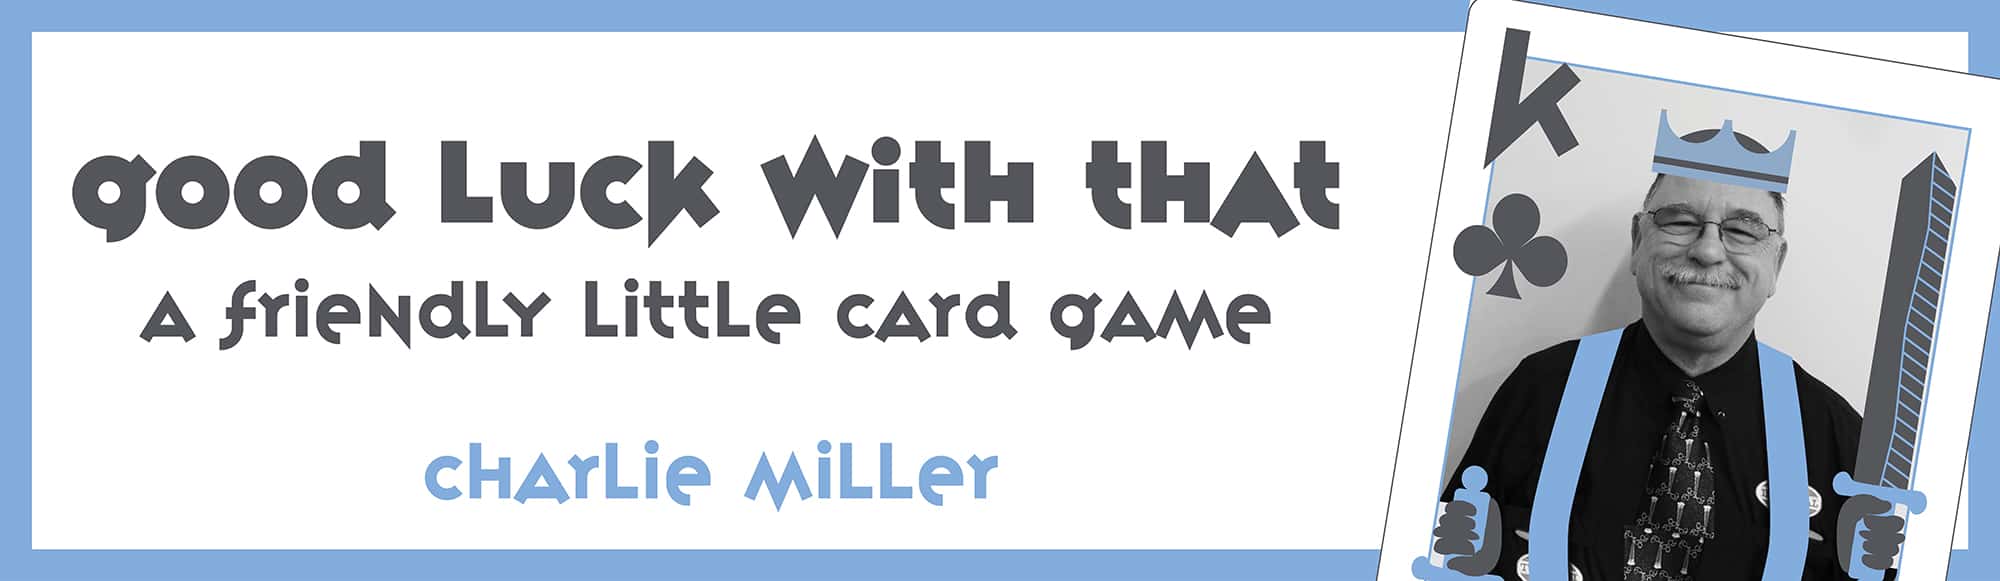 Good Luck With That - A Friendly Little Card Game - by Charlie Miller